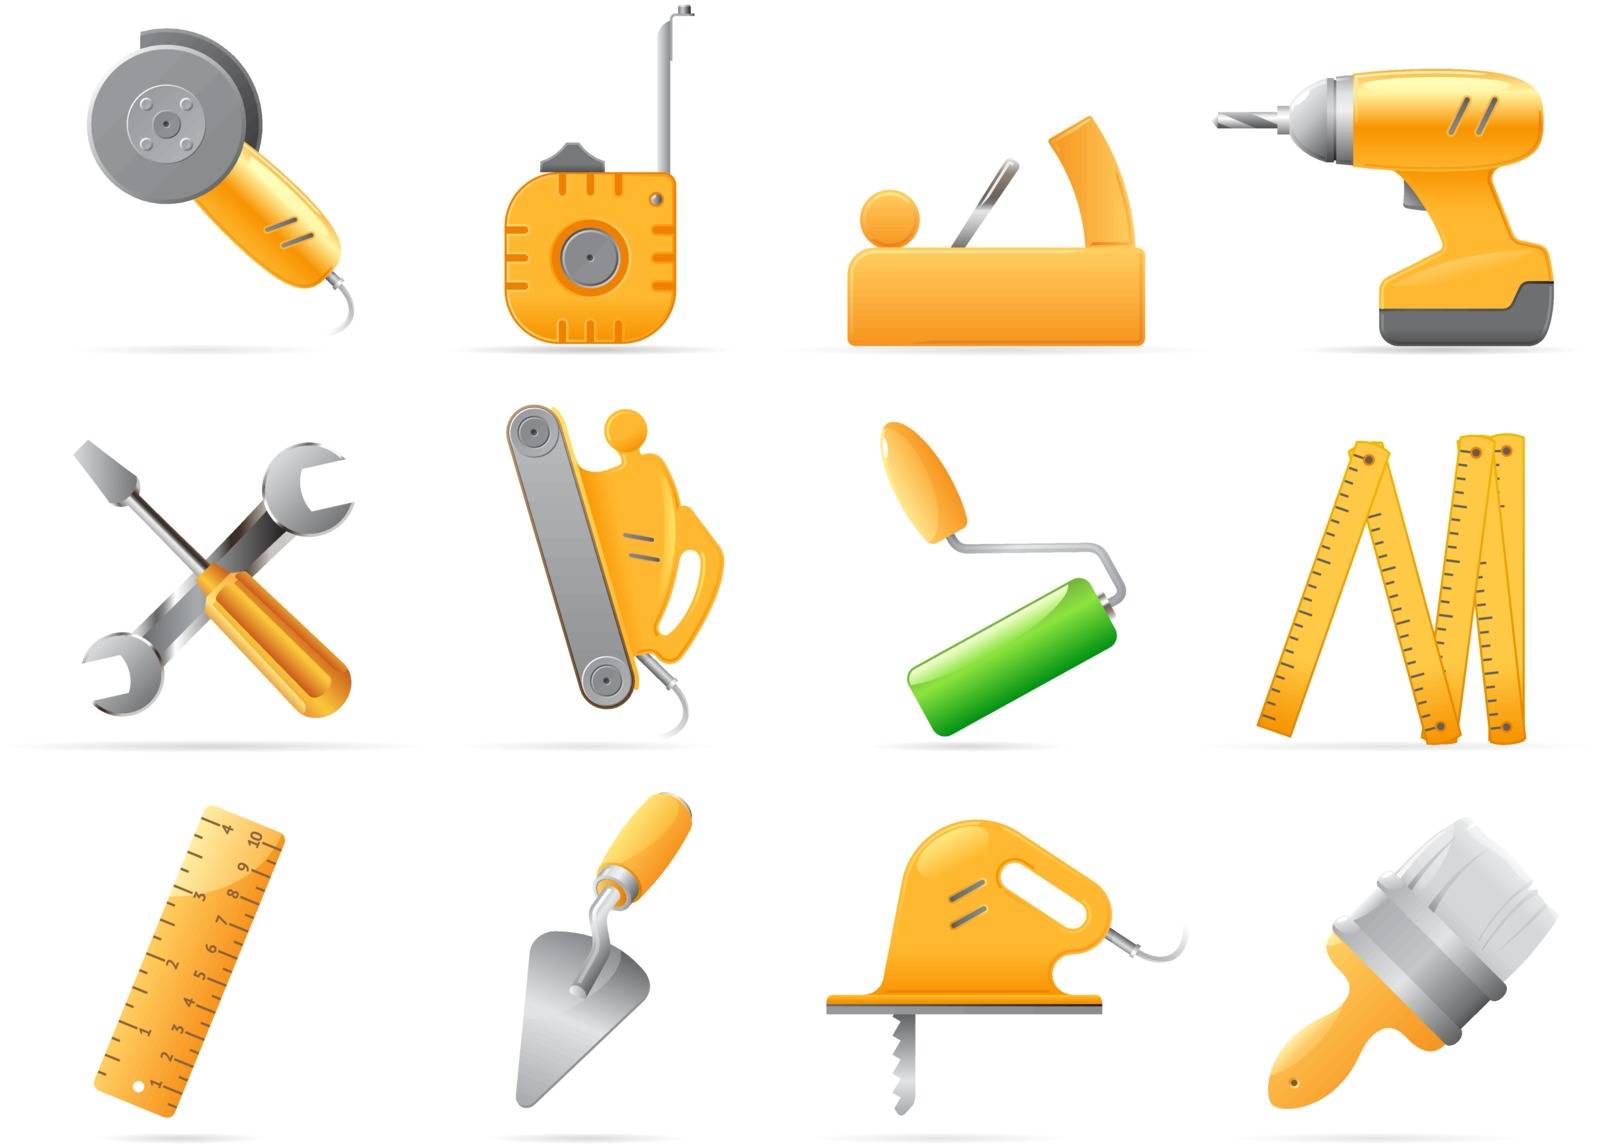 Icons for tools. Vector illustration.